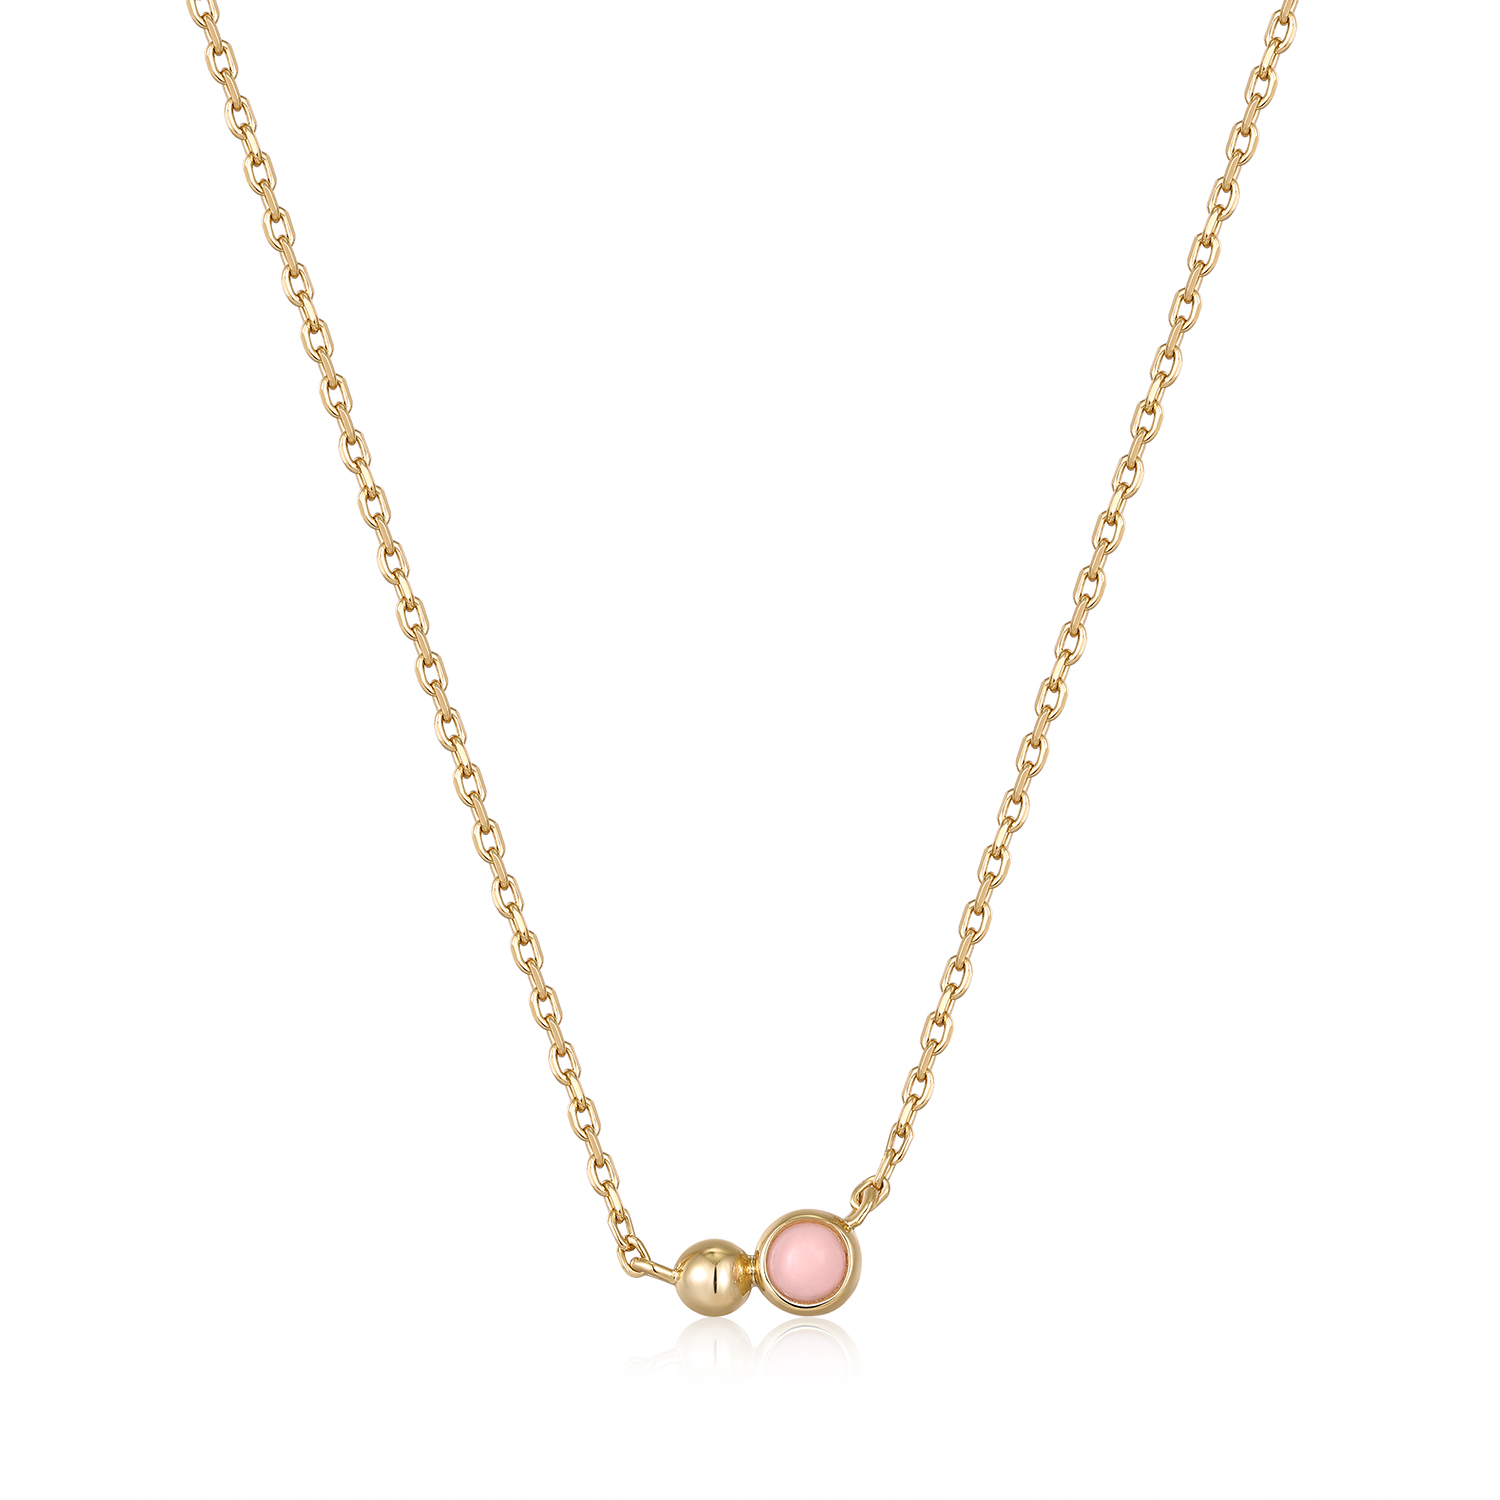 ANIA HAIE Orb Rose Quartz Pendant Necklace, Gold-plated